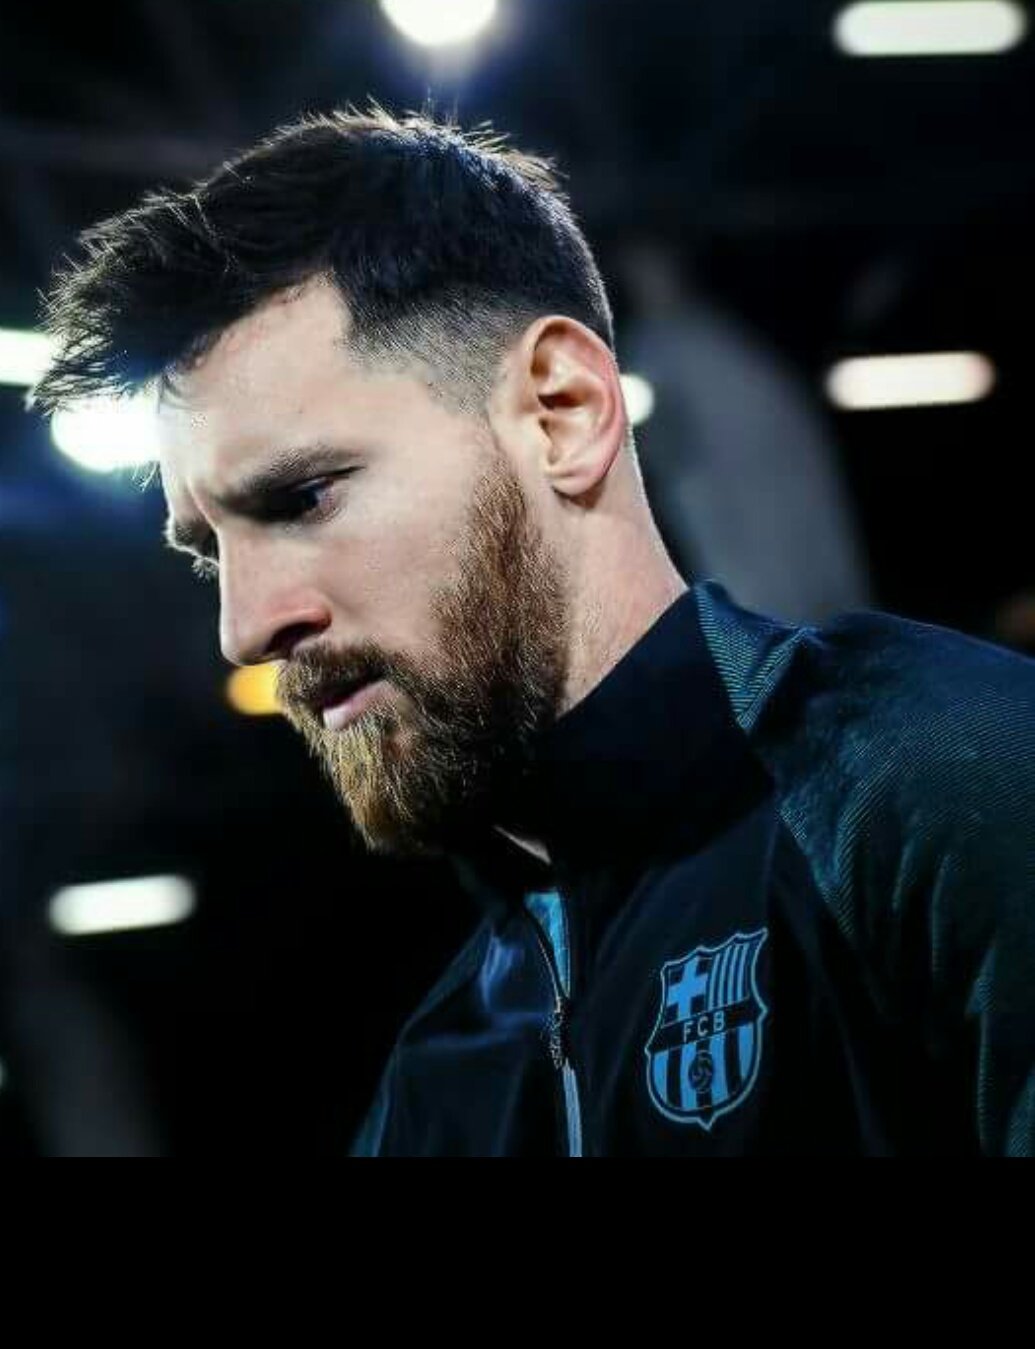 Check Out Photos Of Guy Who Looks Like Messi - Sports - Nigeria